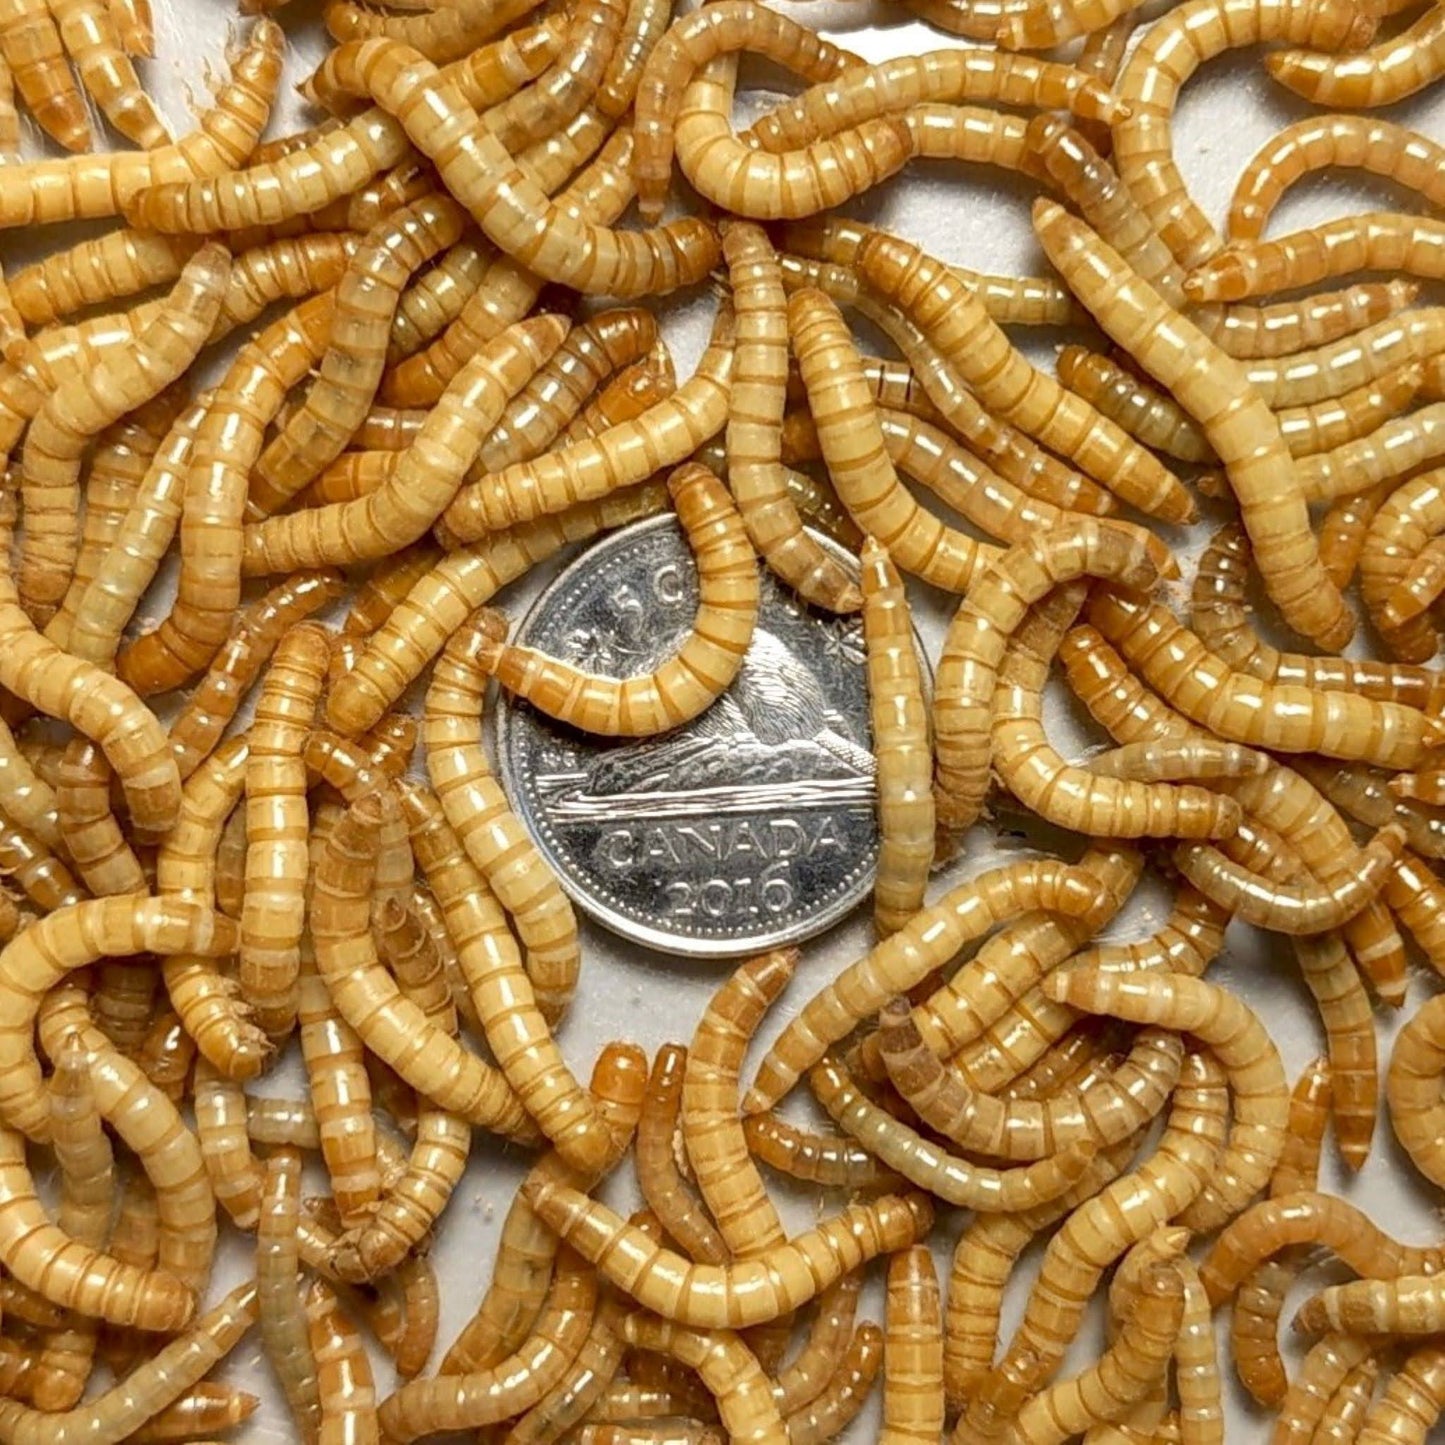 Close up of mealworms with a Canadian nickel for size reference.